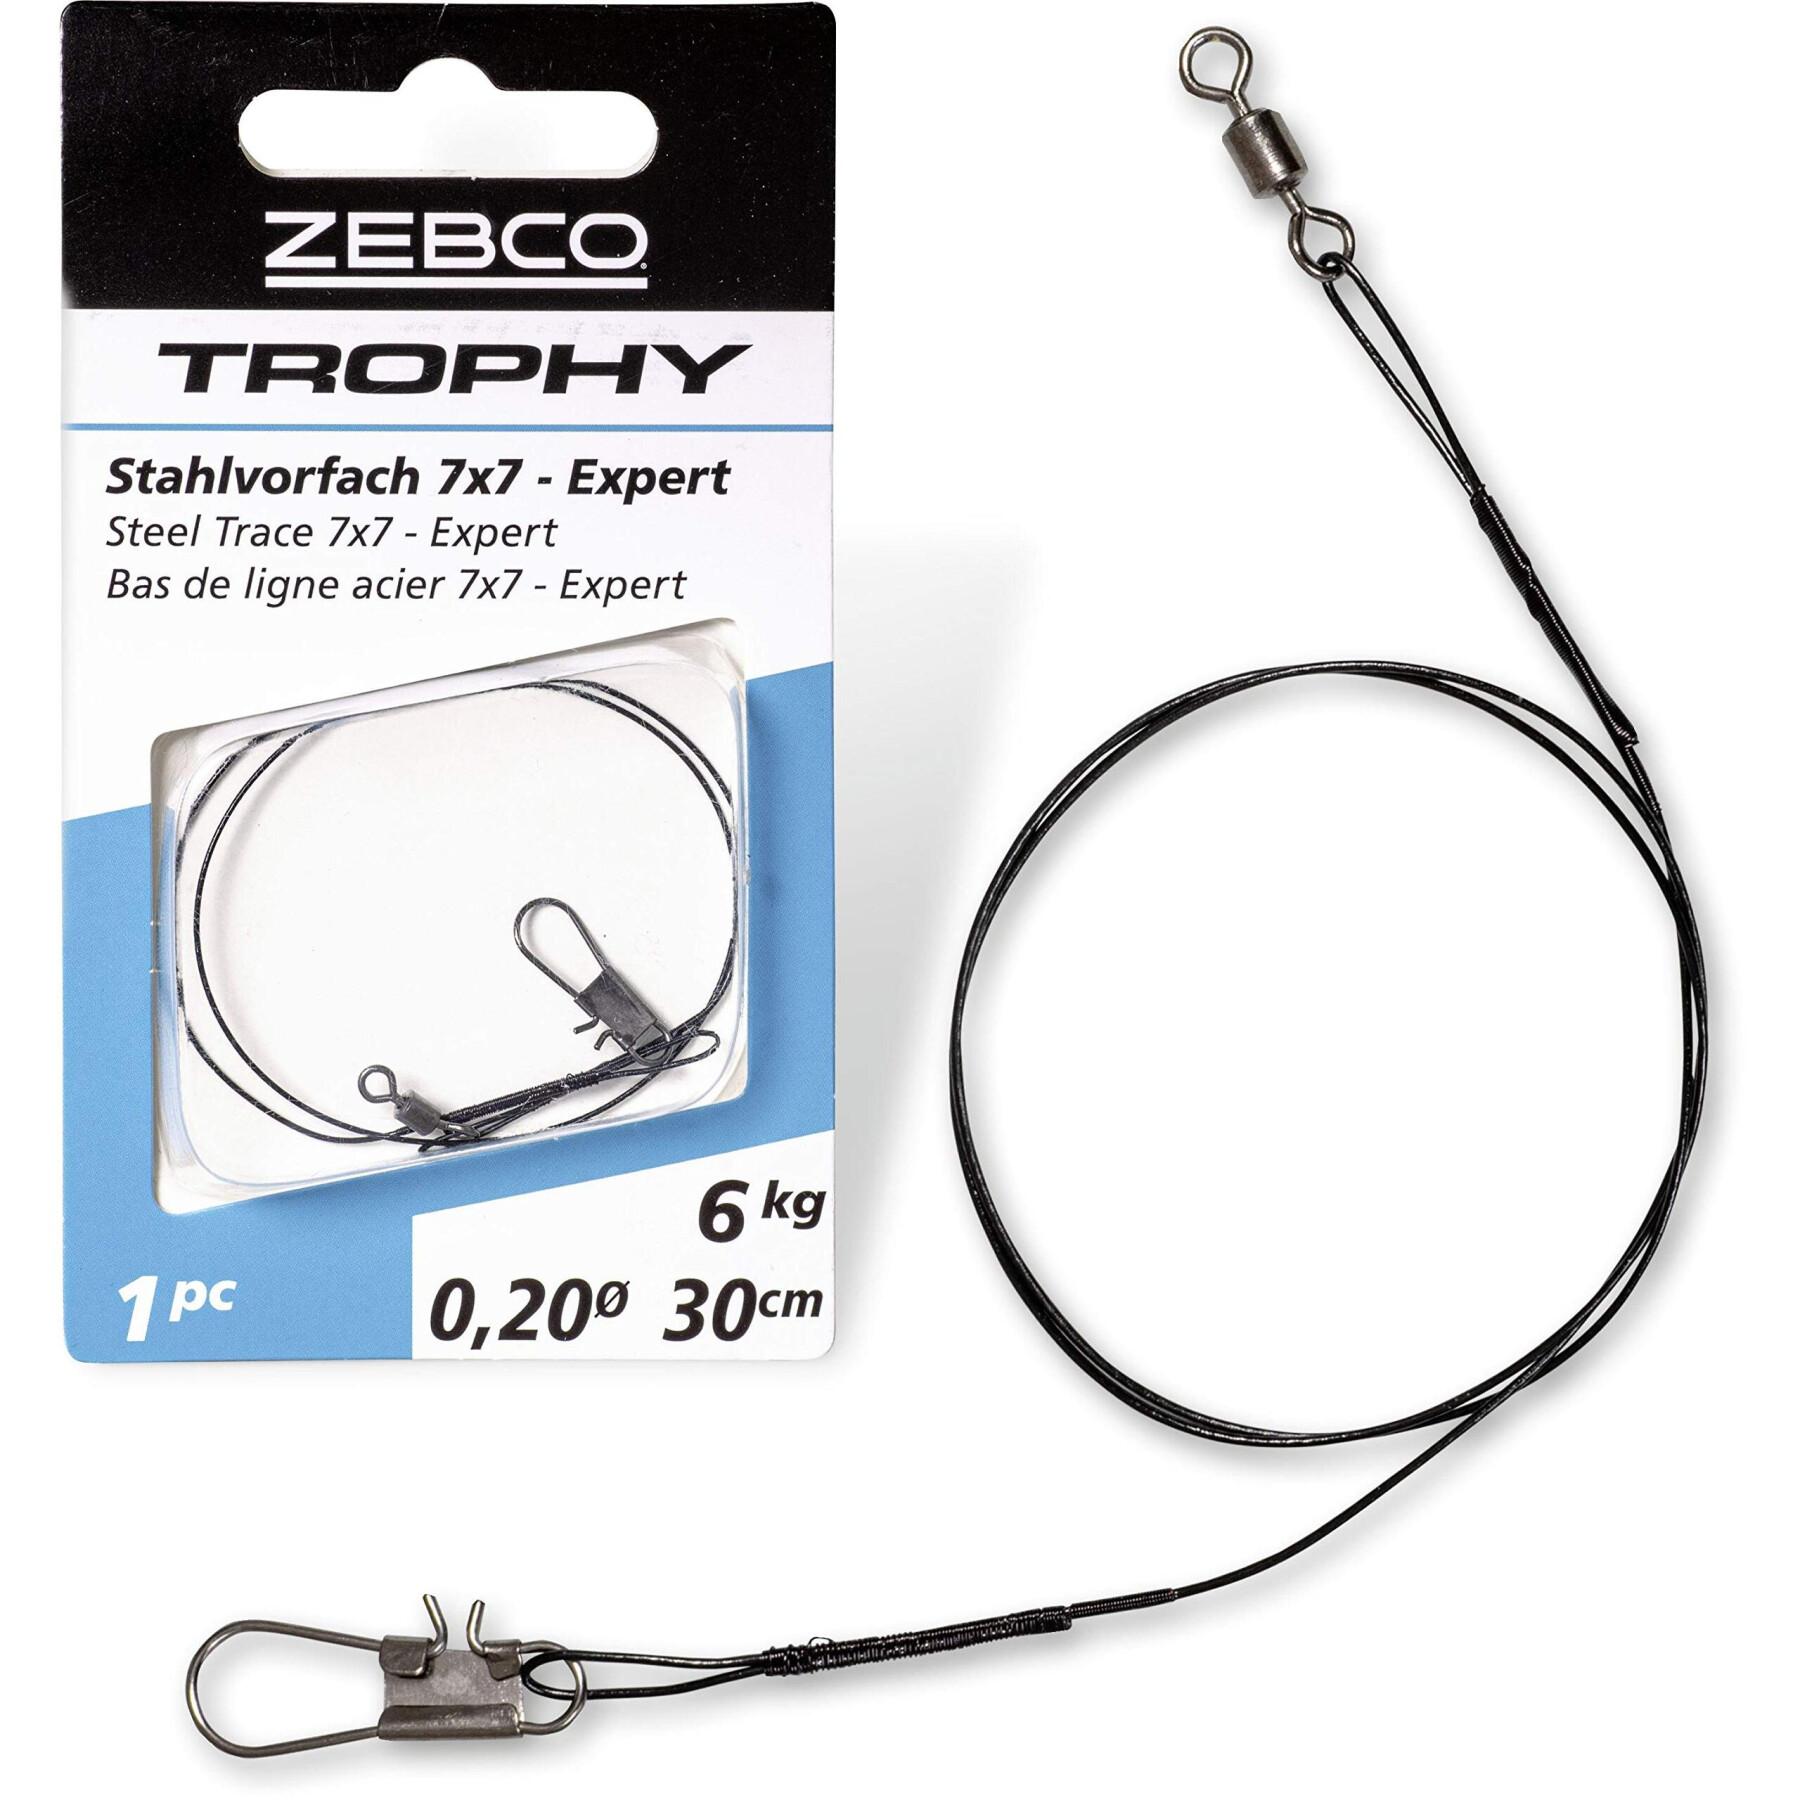 Leader in acciaio Zebco Trophy Trace 7x7 - Expert